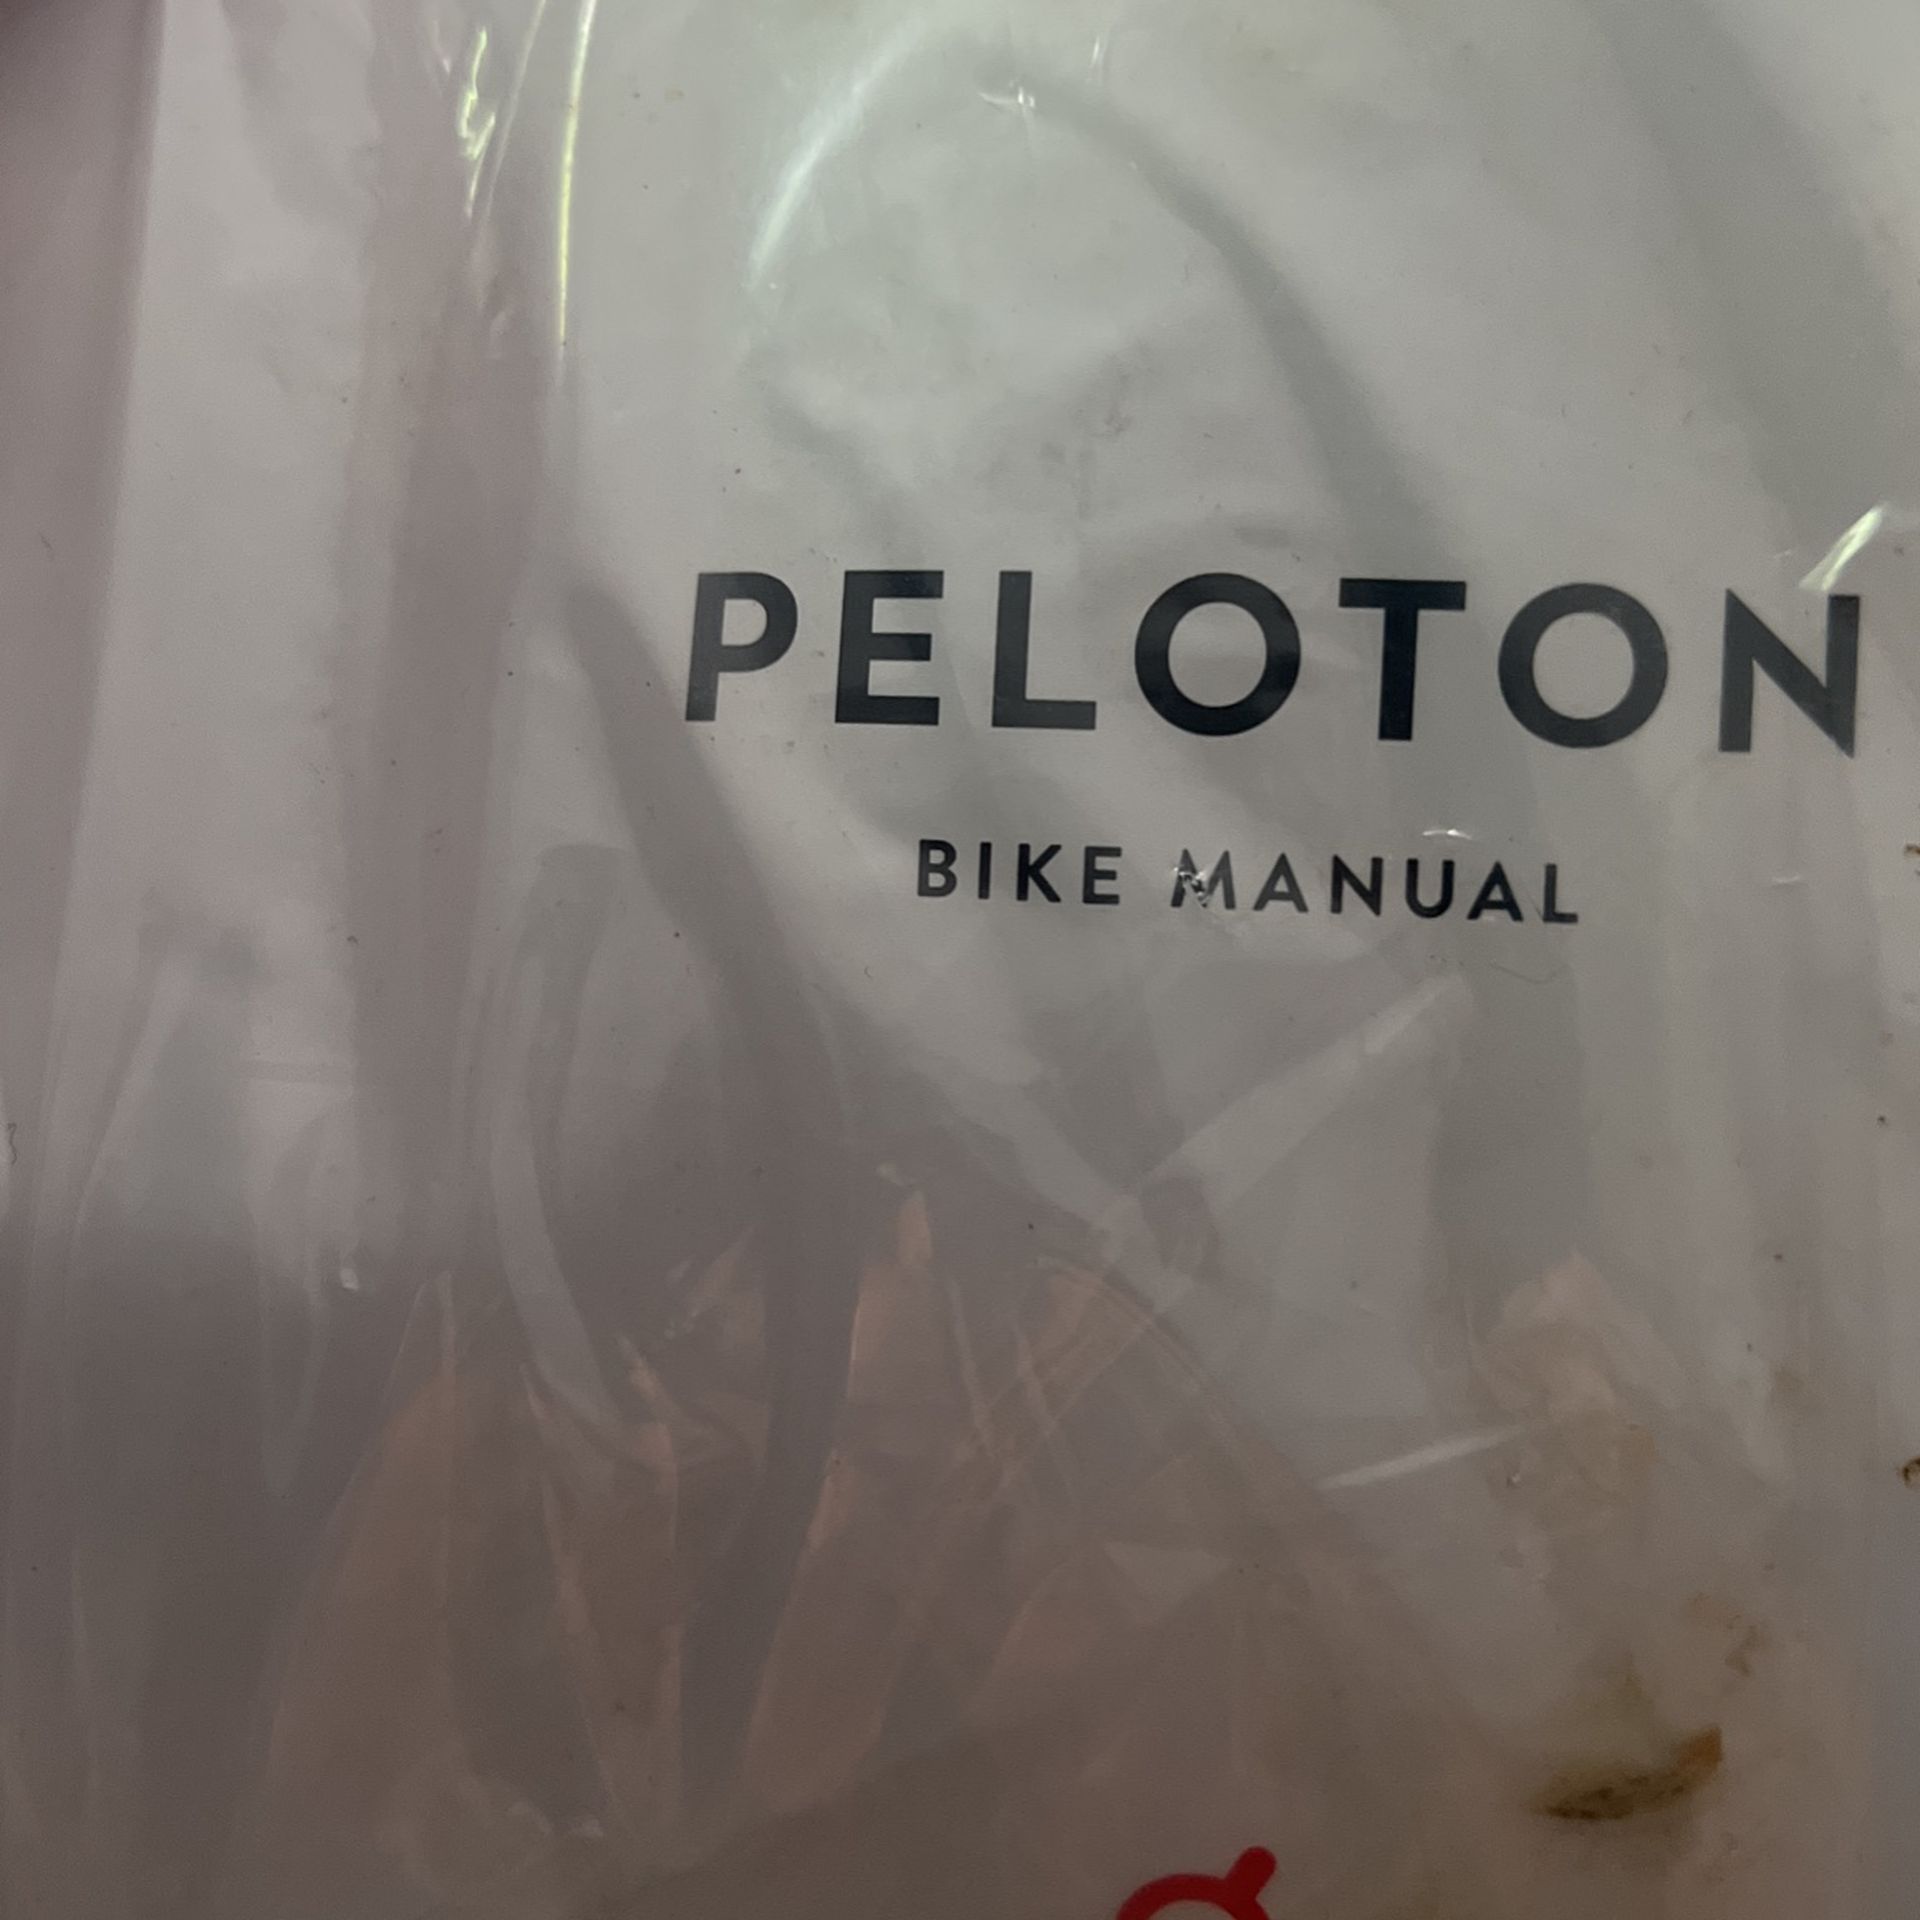 Almost New Peloton Bike. CASH ONLY